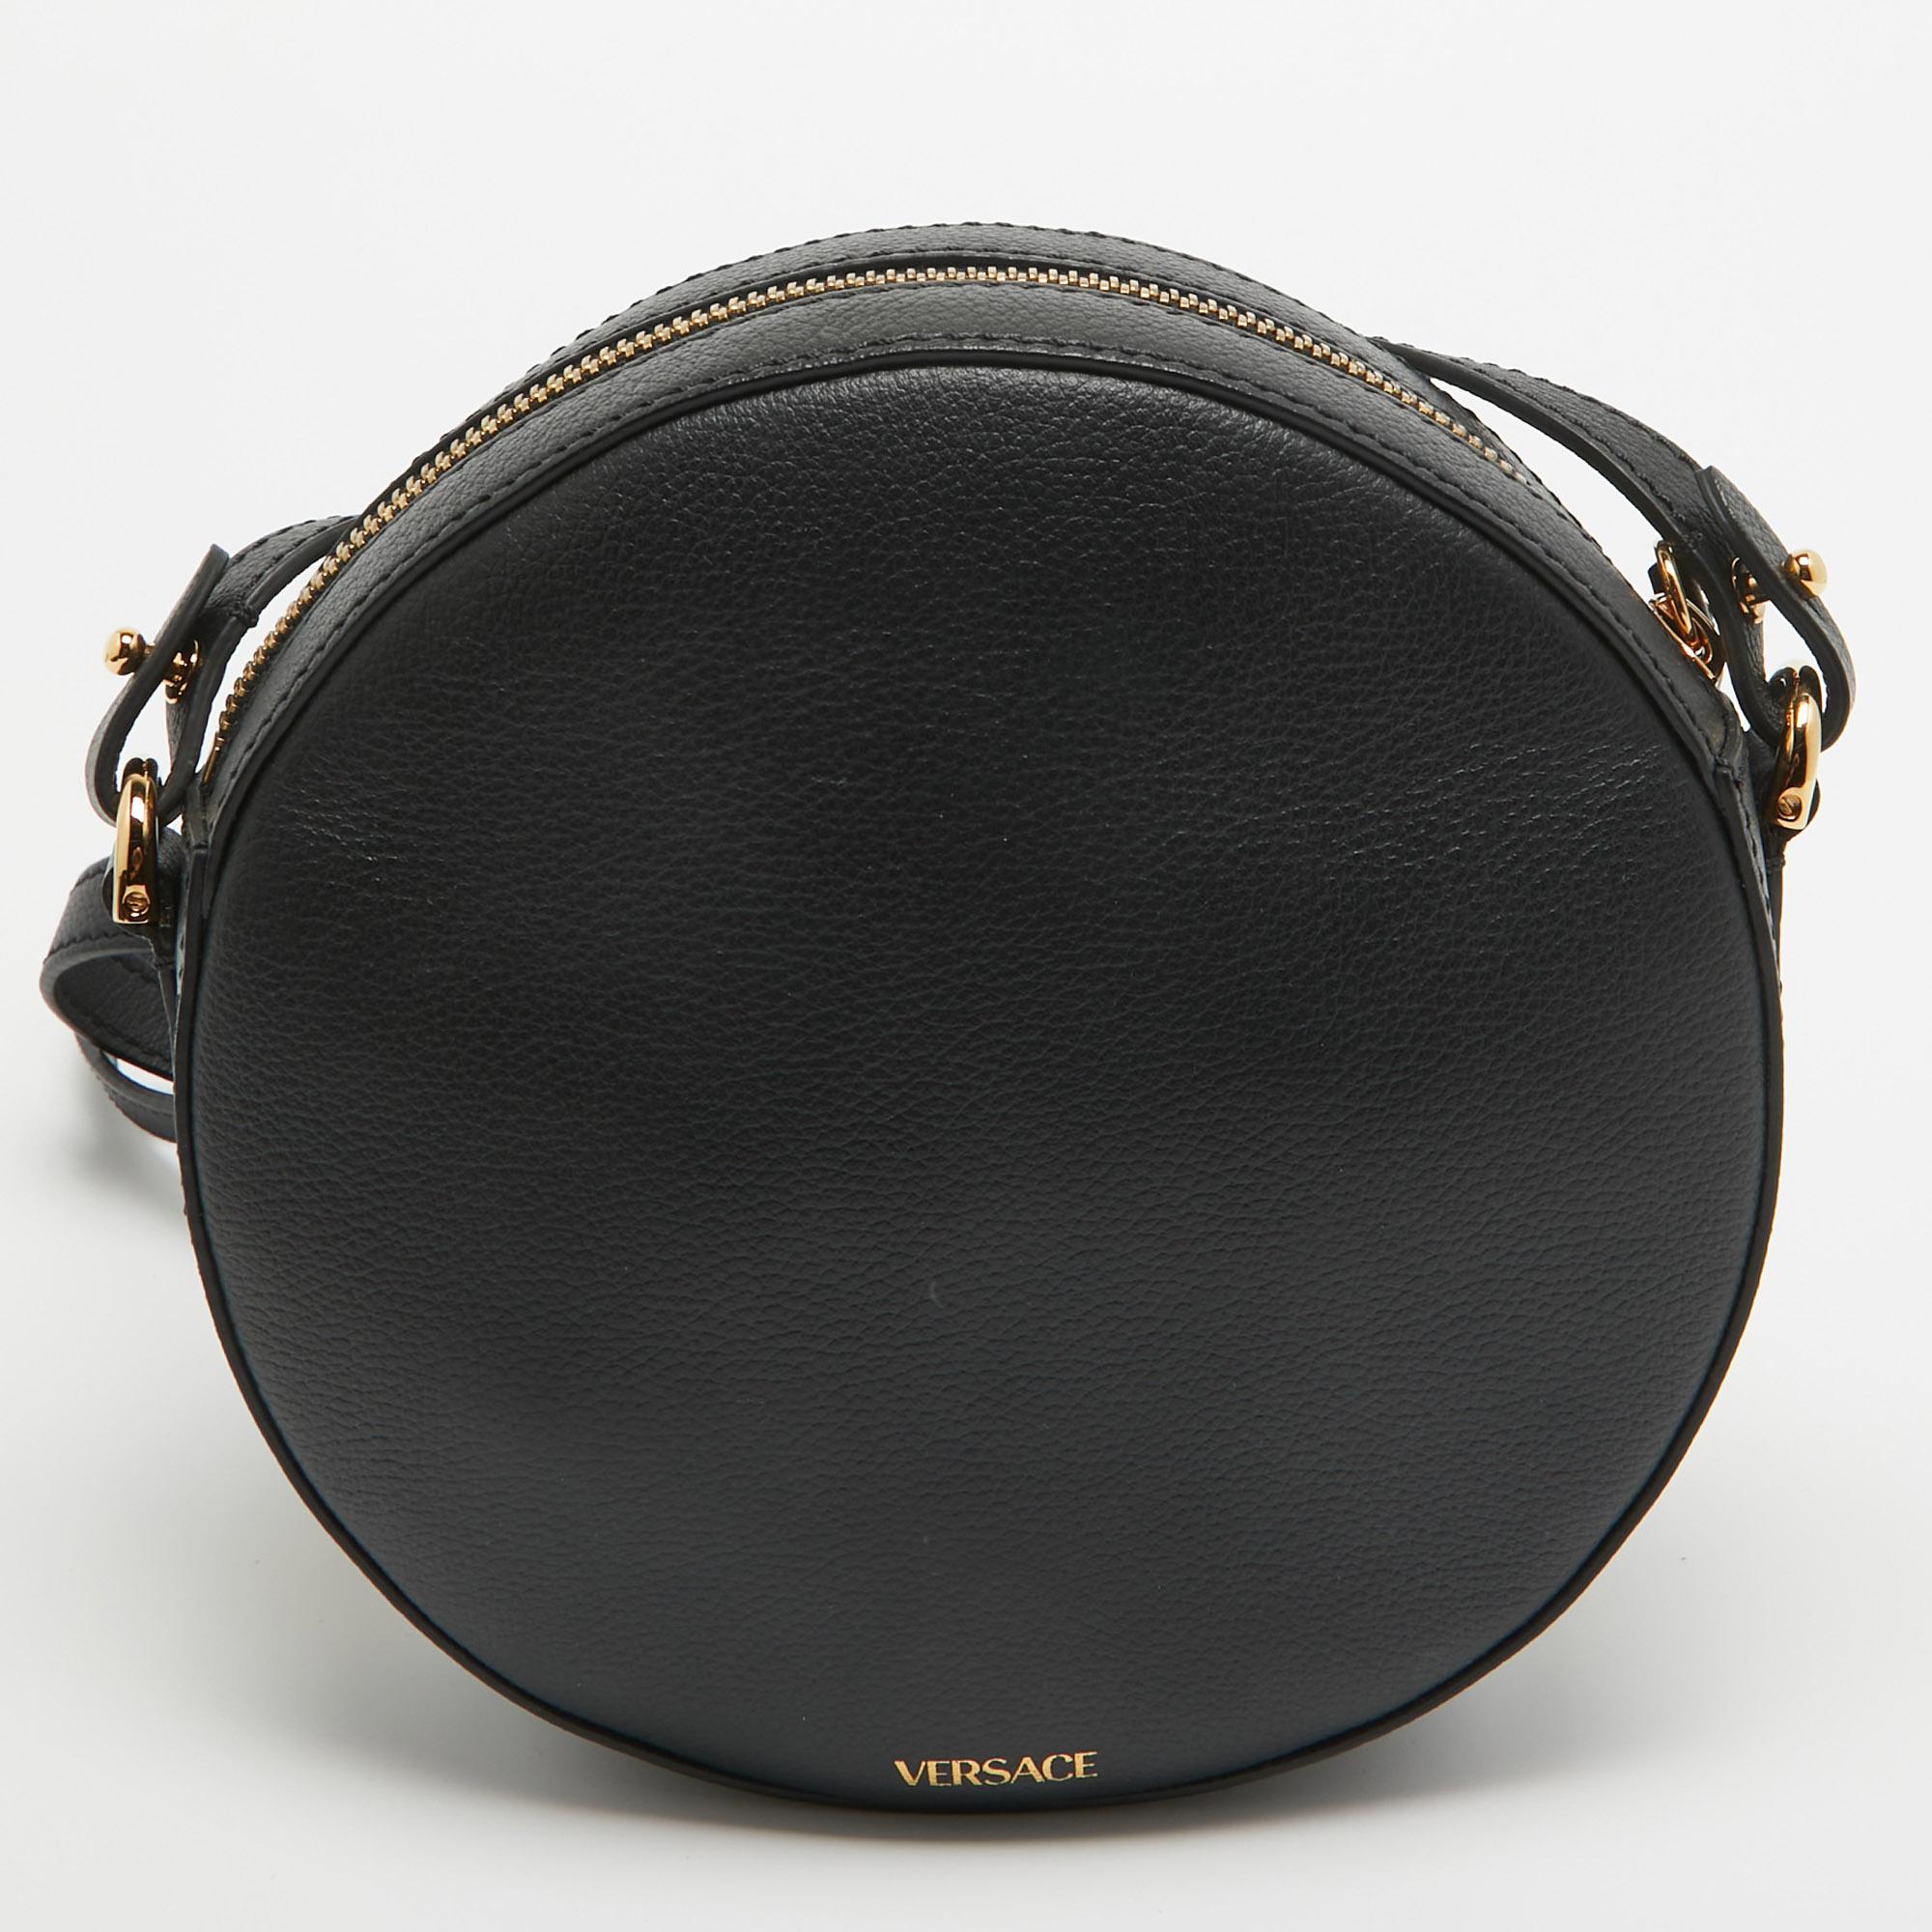 Crafted from luxurious black leather, the Versace La Medusa Crossbody Bag exudes opulence and style. Its sleek round design is adorned with the iconic Medusa emblem, while the chain strap adds a touch of glamour. Perfect for adding a chic edge to